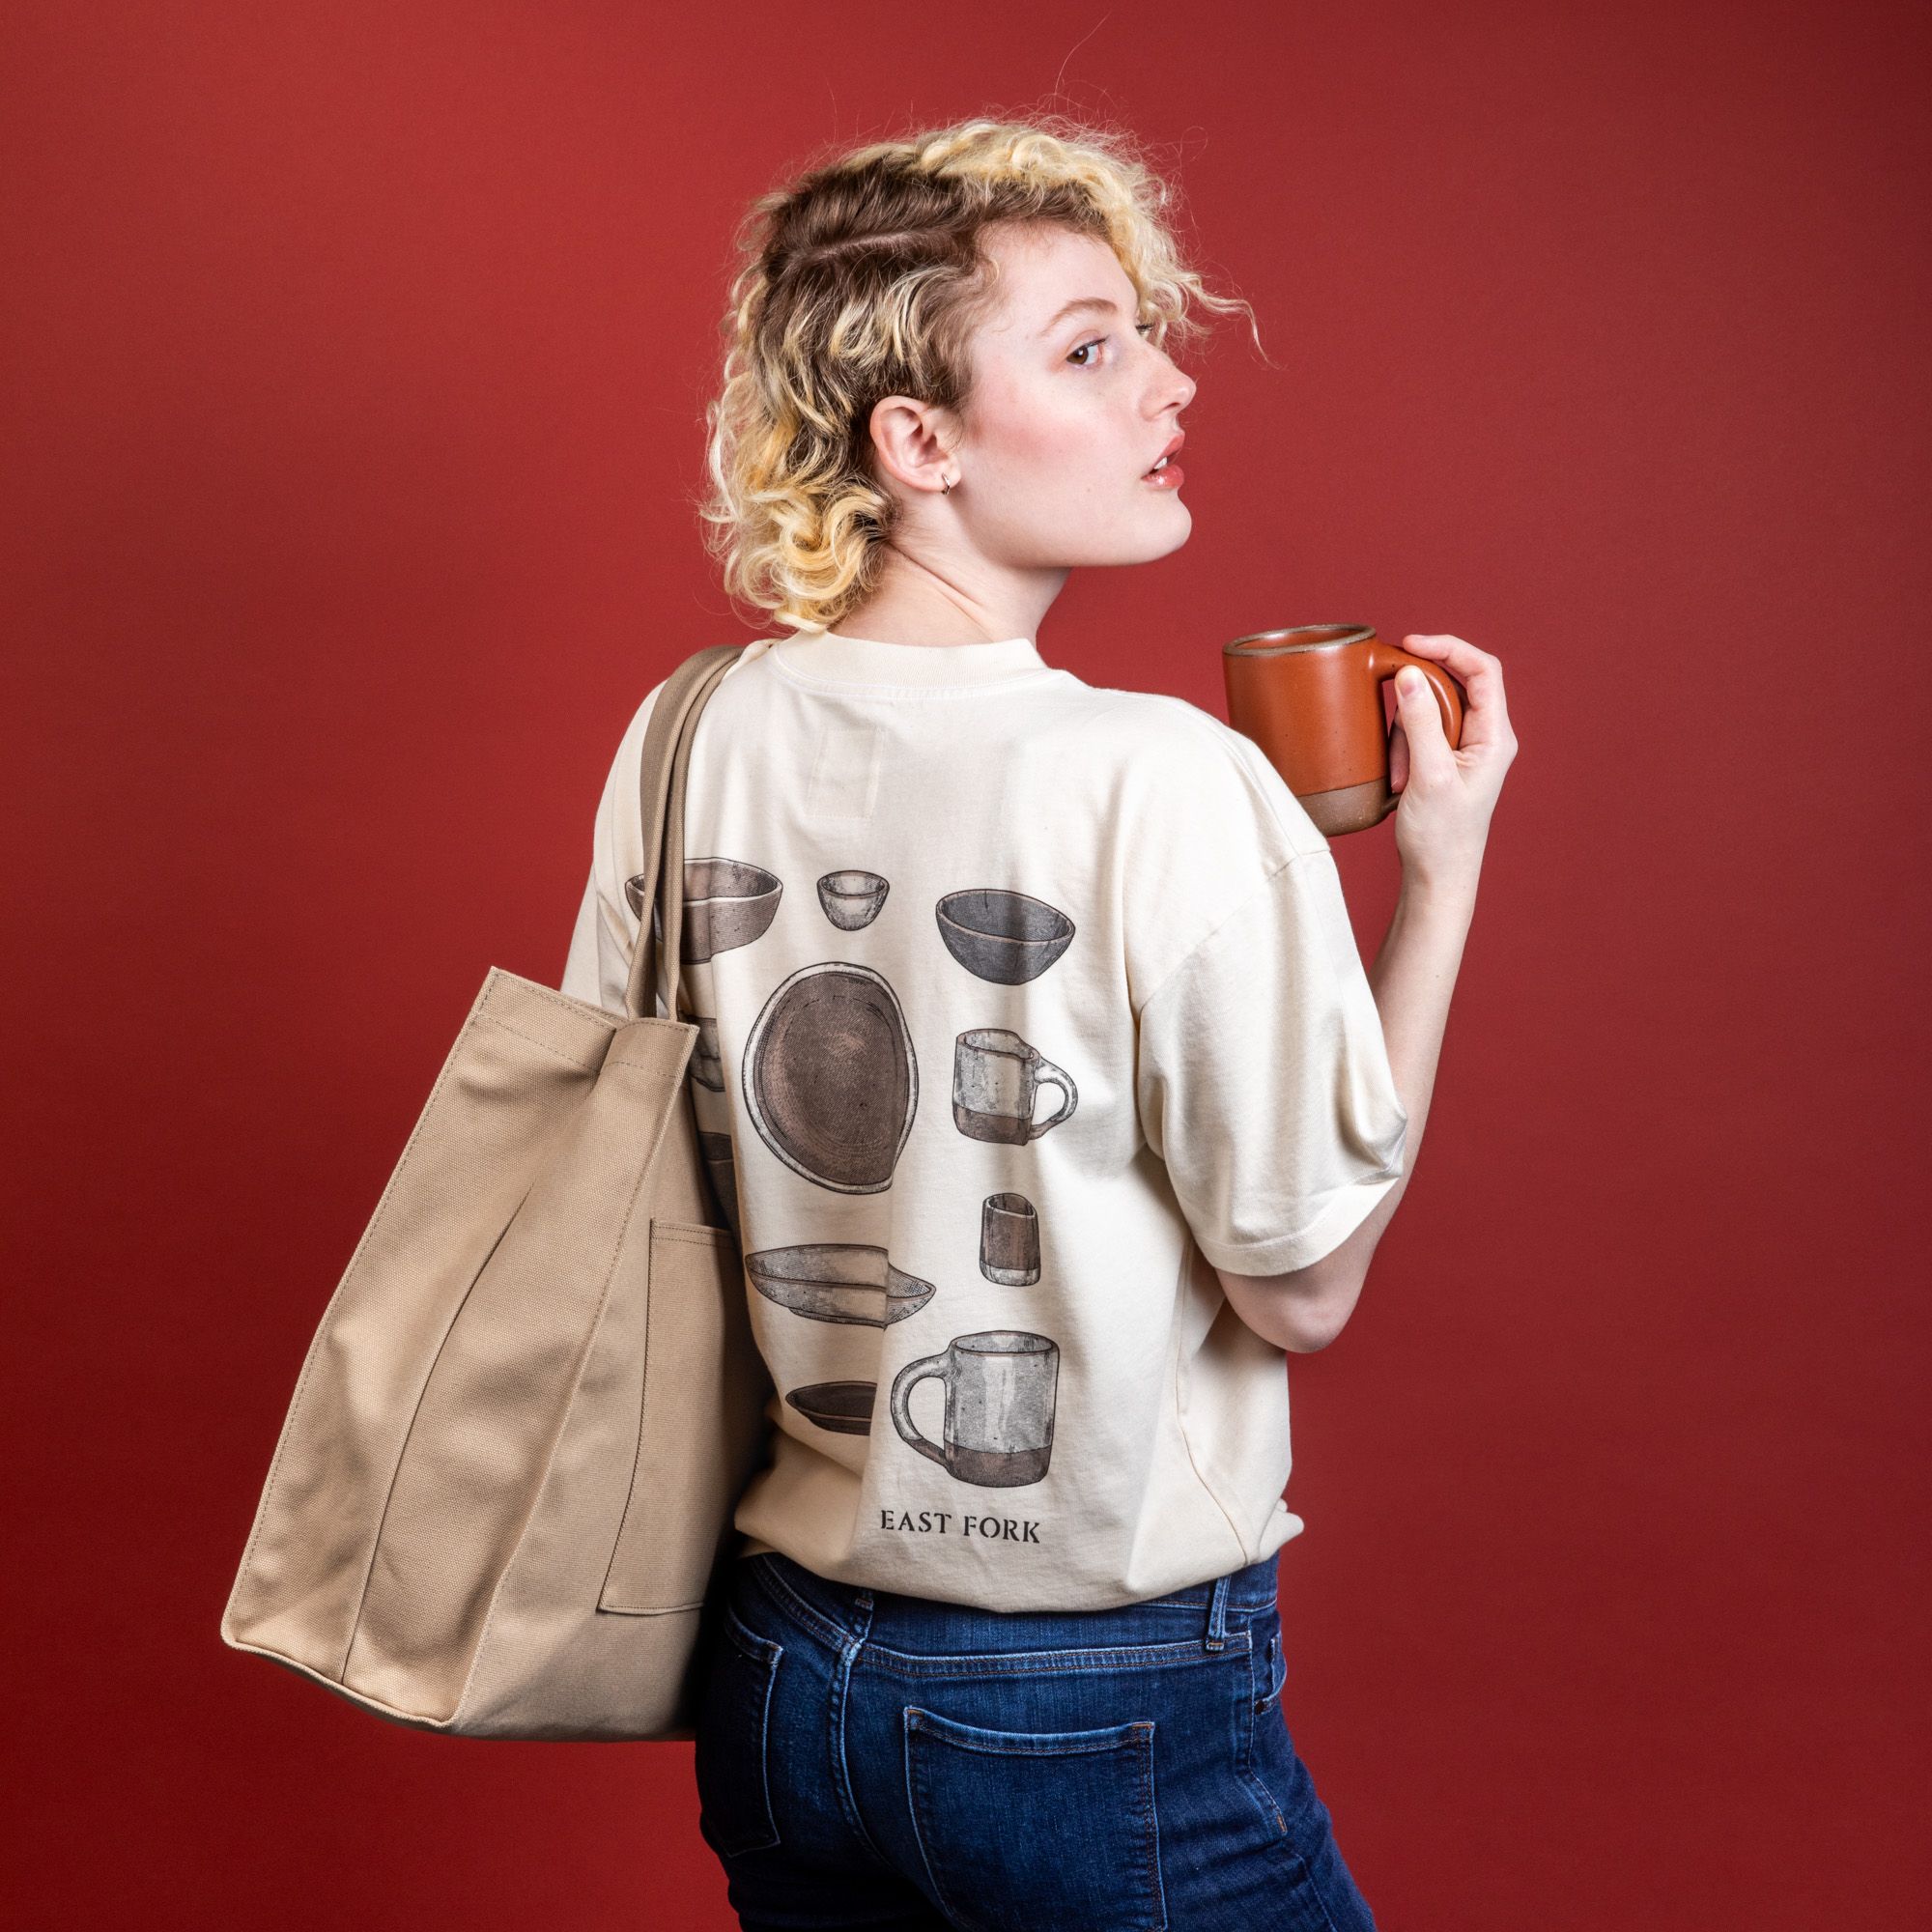 A model wears a t-shirt, jeans, and a sturdy tan canvas tote and a terracotta ceramic mug in her hand.